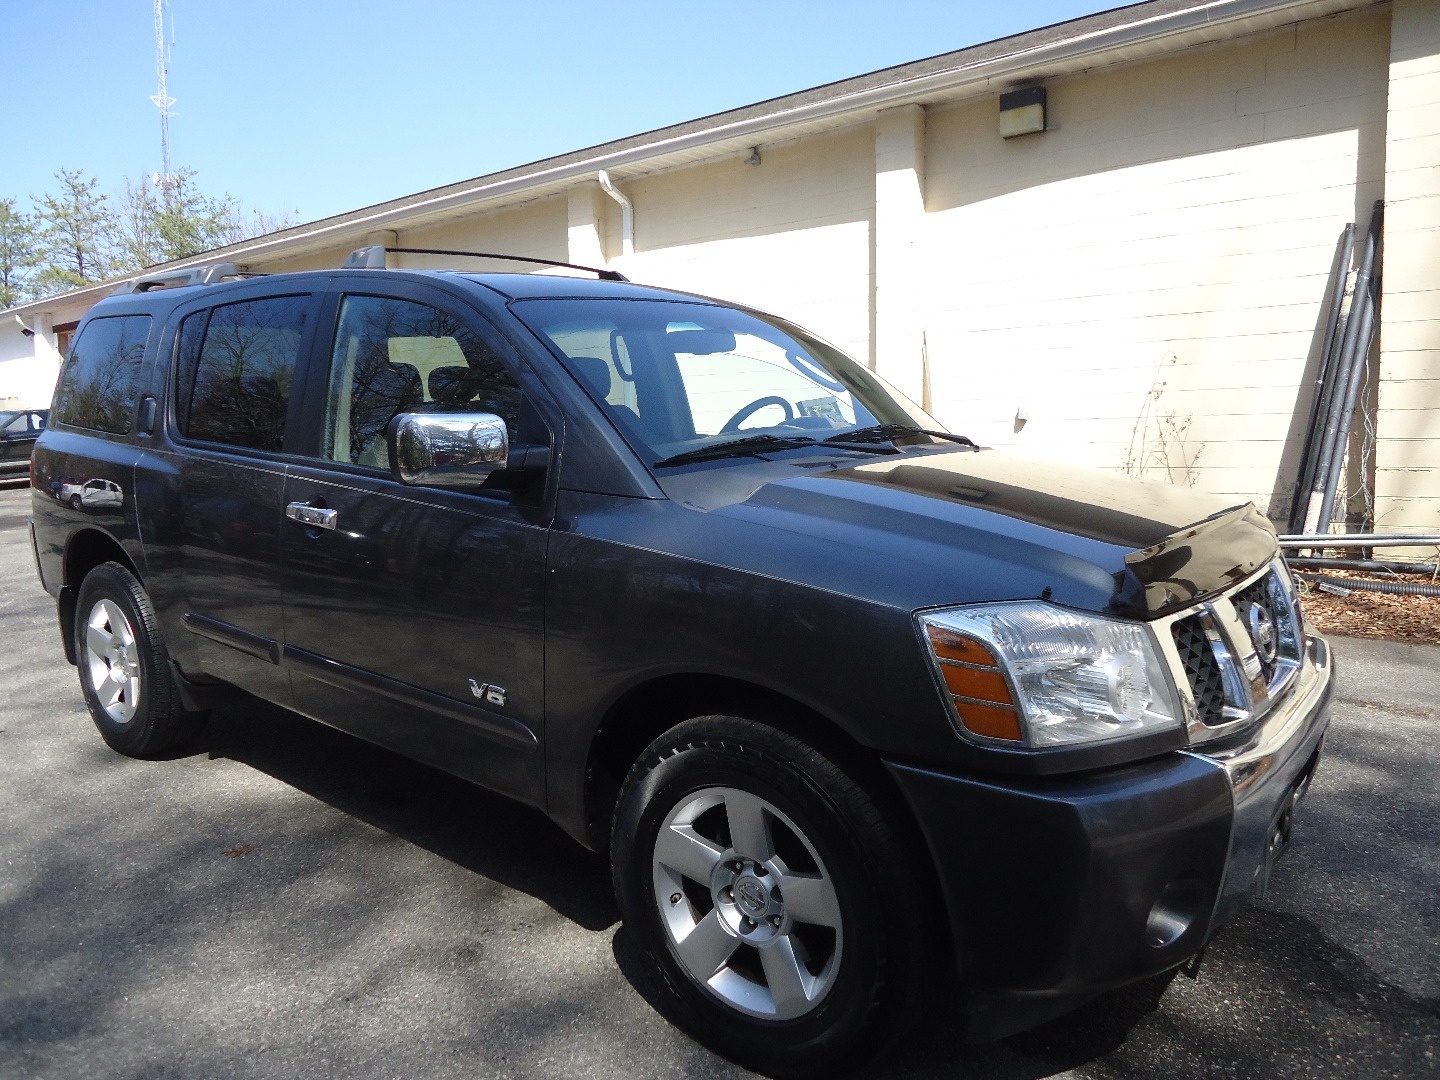 Finding a used 2007 nissan armada